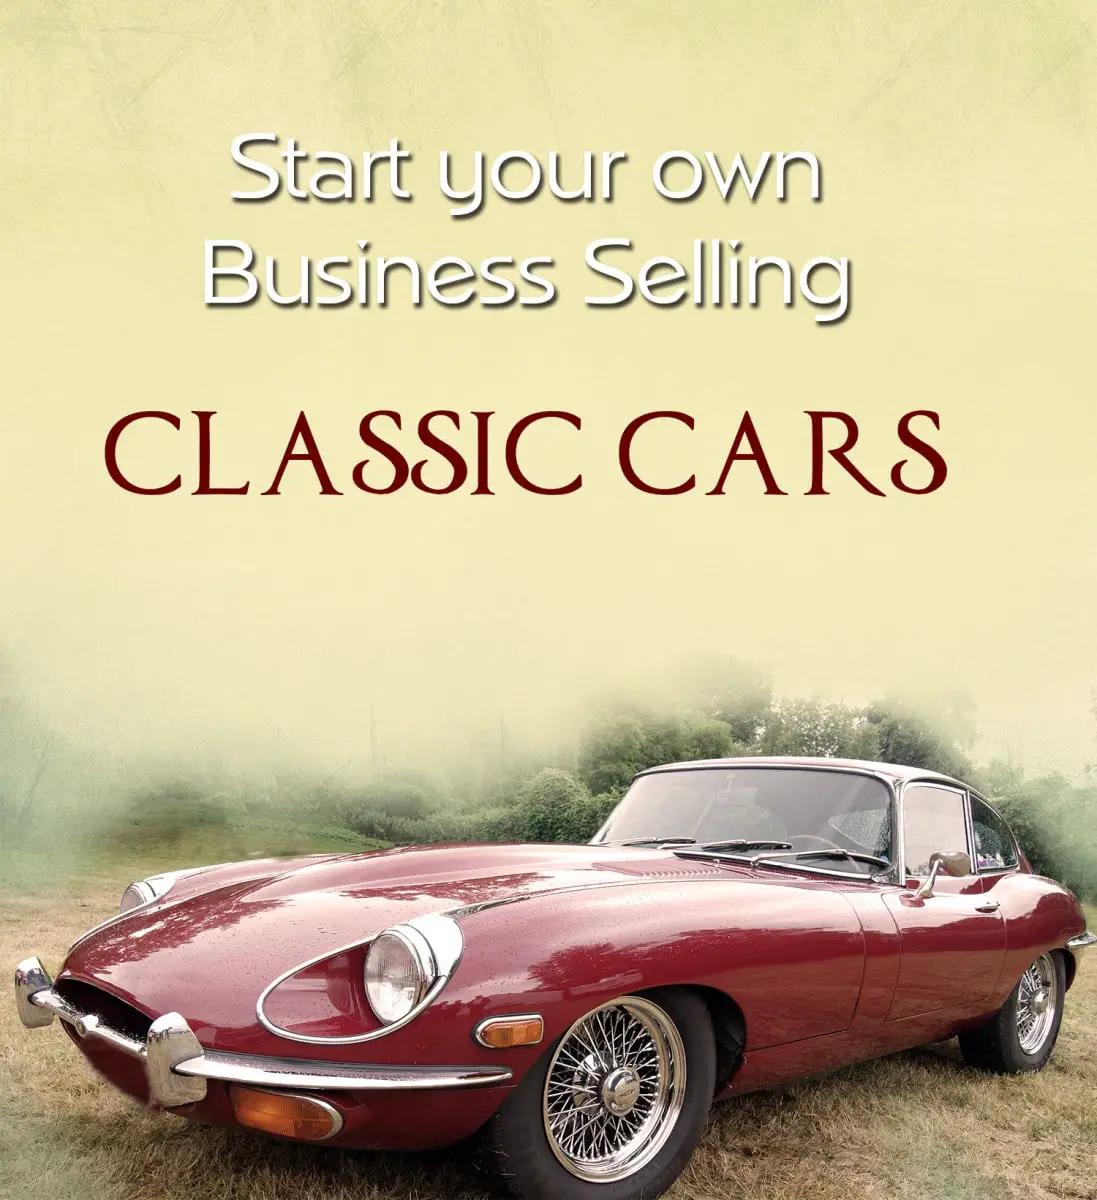 How to Start Your Own Business Selling Classic Cars